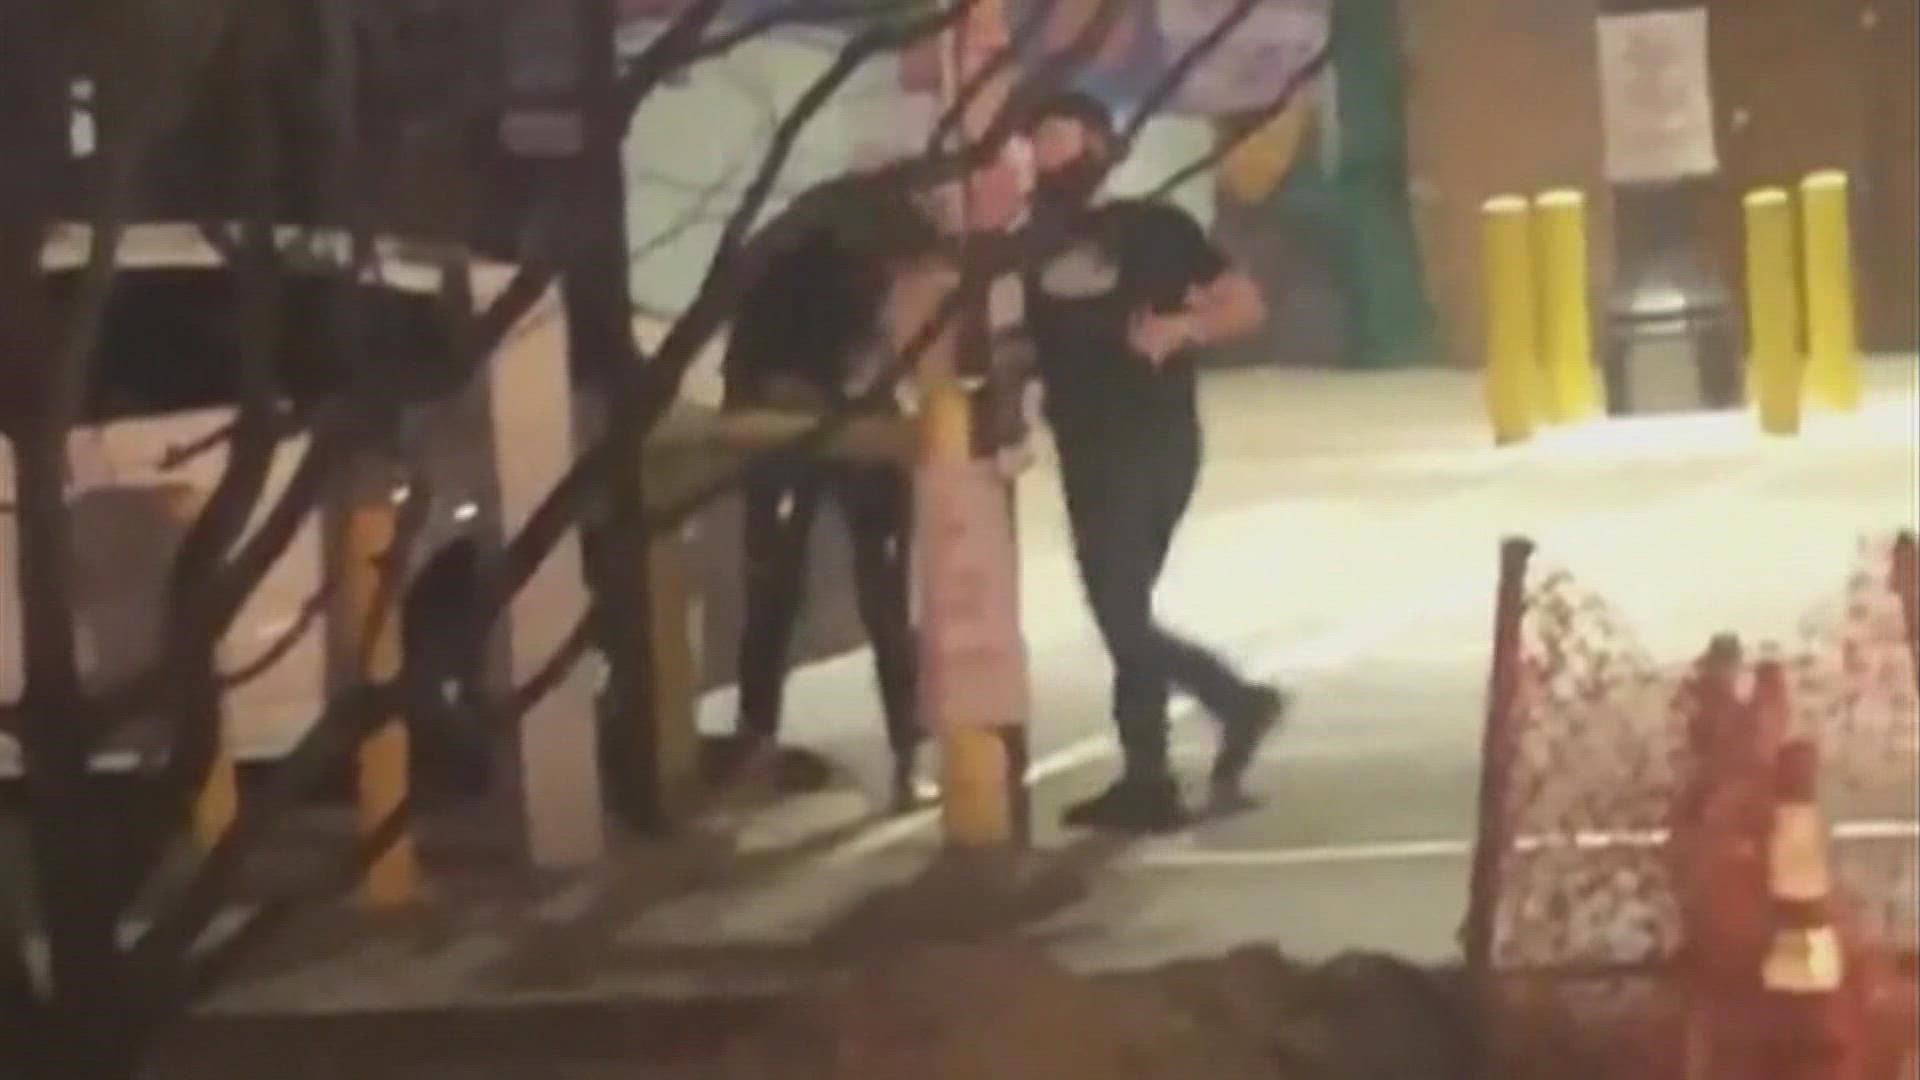 Austin Shuffield was arrested after a video surfaced of him armed with a gun and punching L'Dajohnique Lee on March 21, 2019, in a Deep Ellum parking lot.